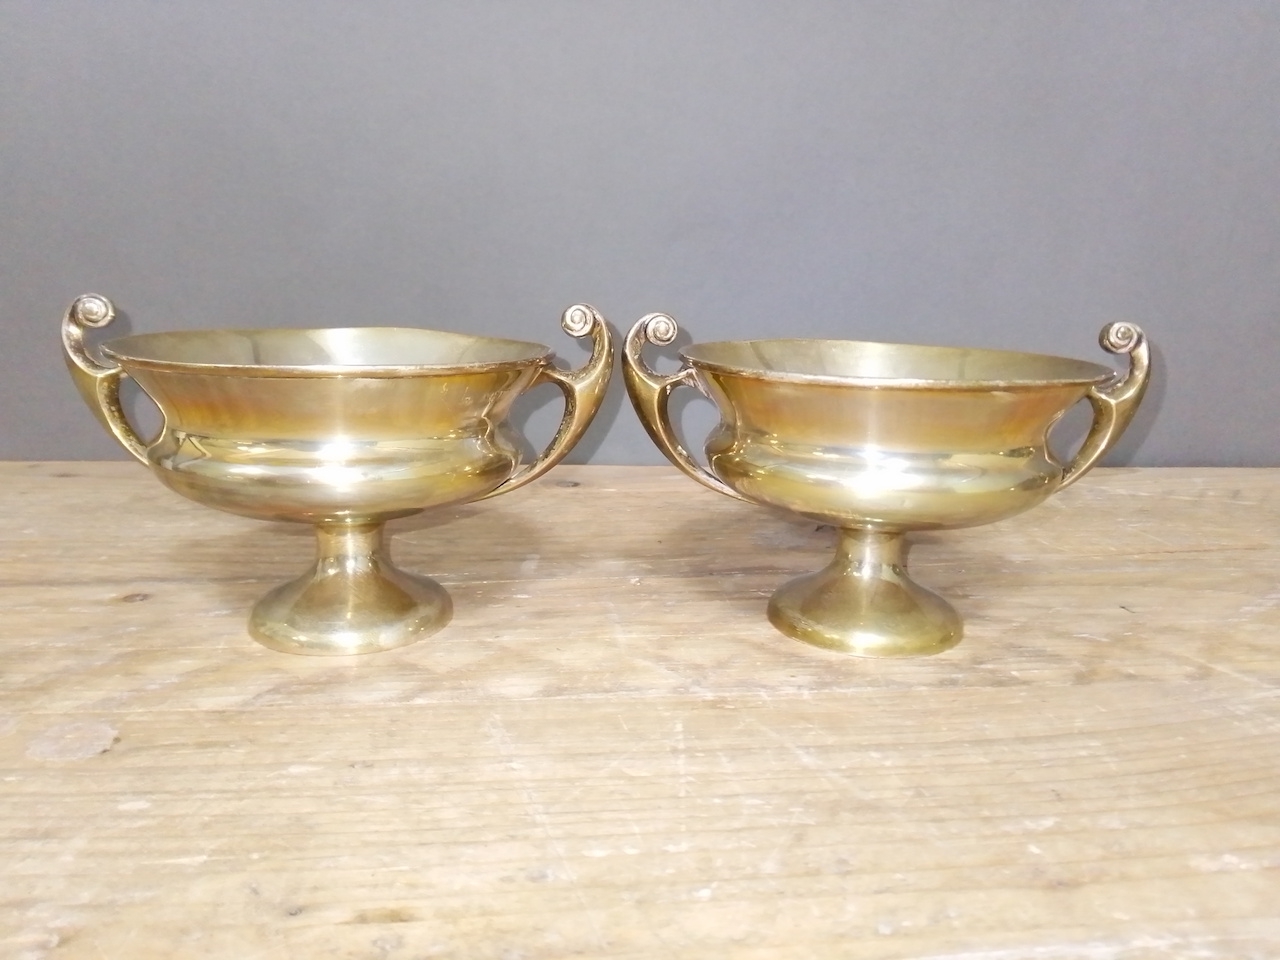 A pair of Edward VII twin handled silver pedestal dishes, Horace Woodward & Co Ltd, London 1907,